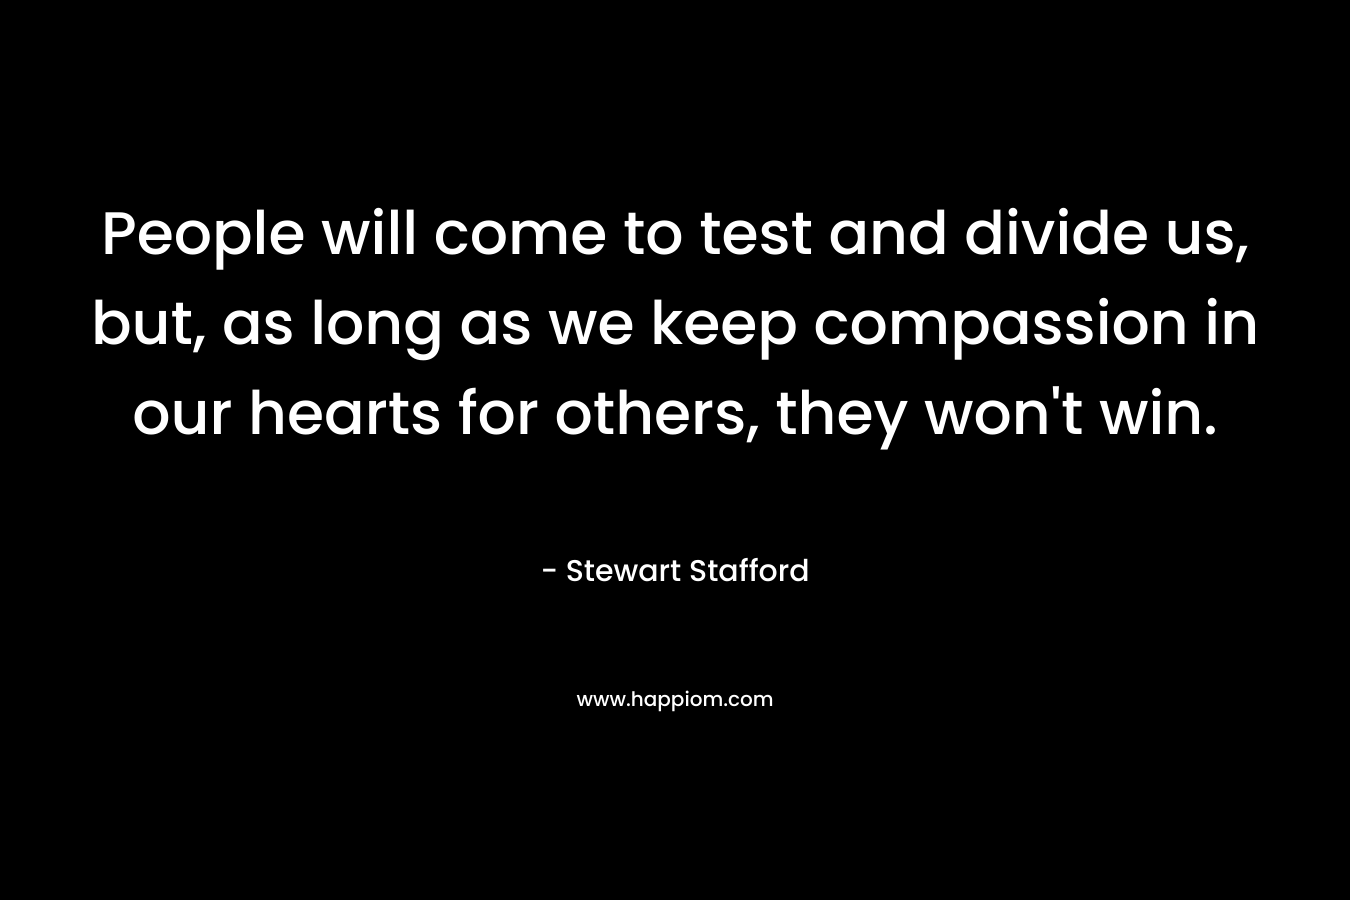 People will come to test and divide us, but, as long as we keep compassion in our hearts for others, they won’t win. – Stewart Stafford